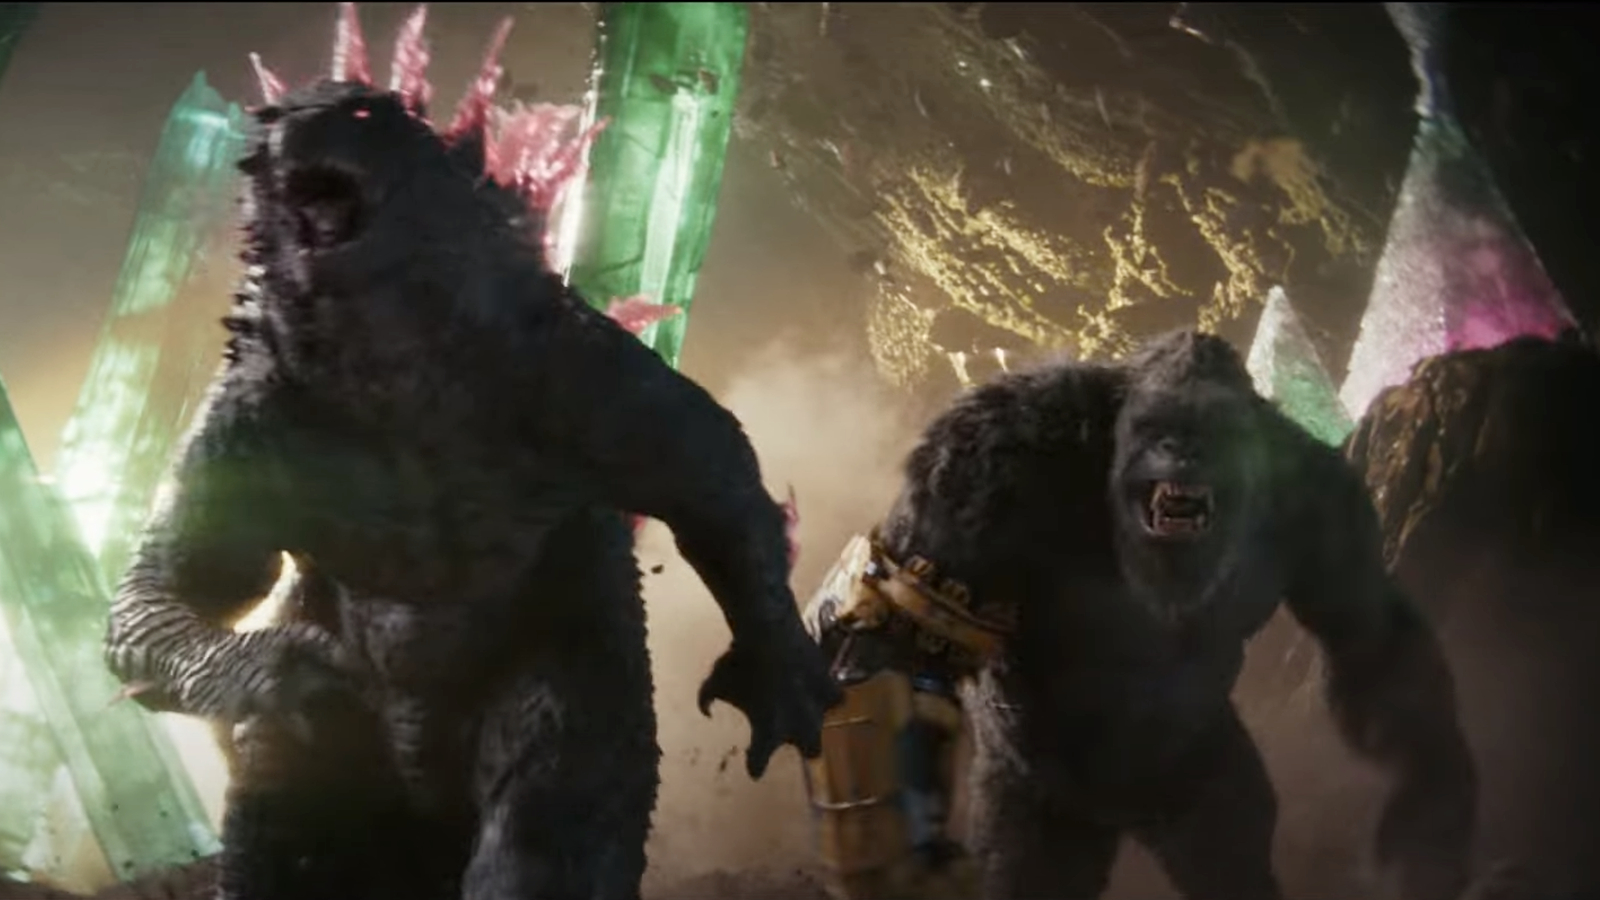 Godzilla x Kong trailer: The almighty and fearsome unite to